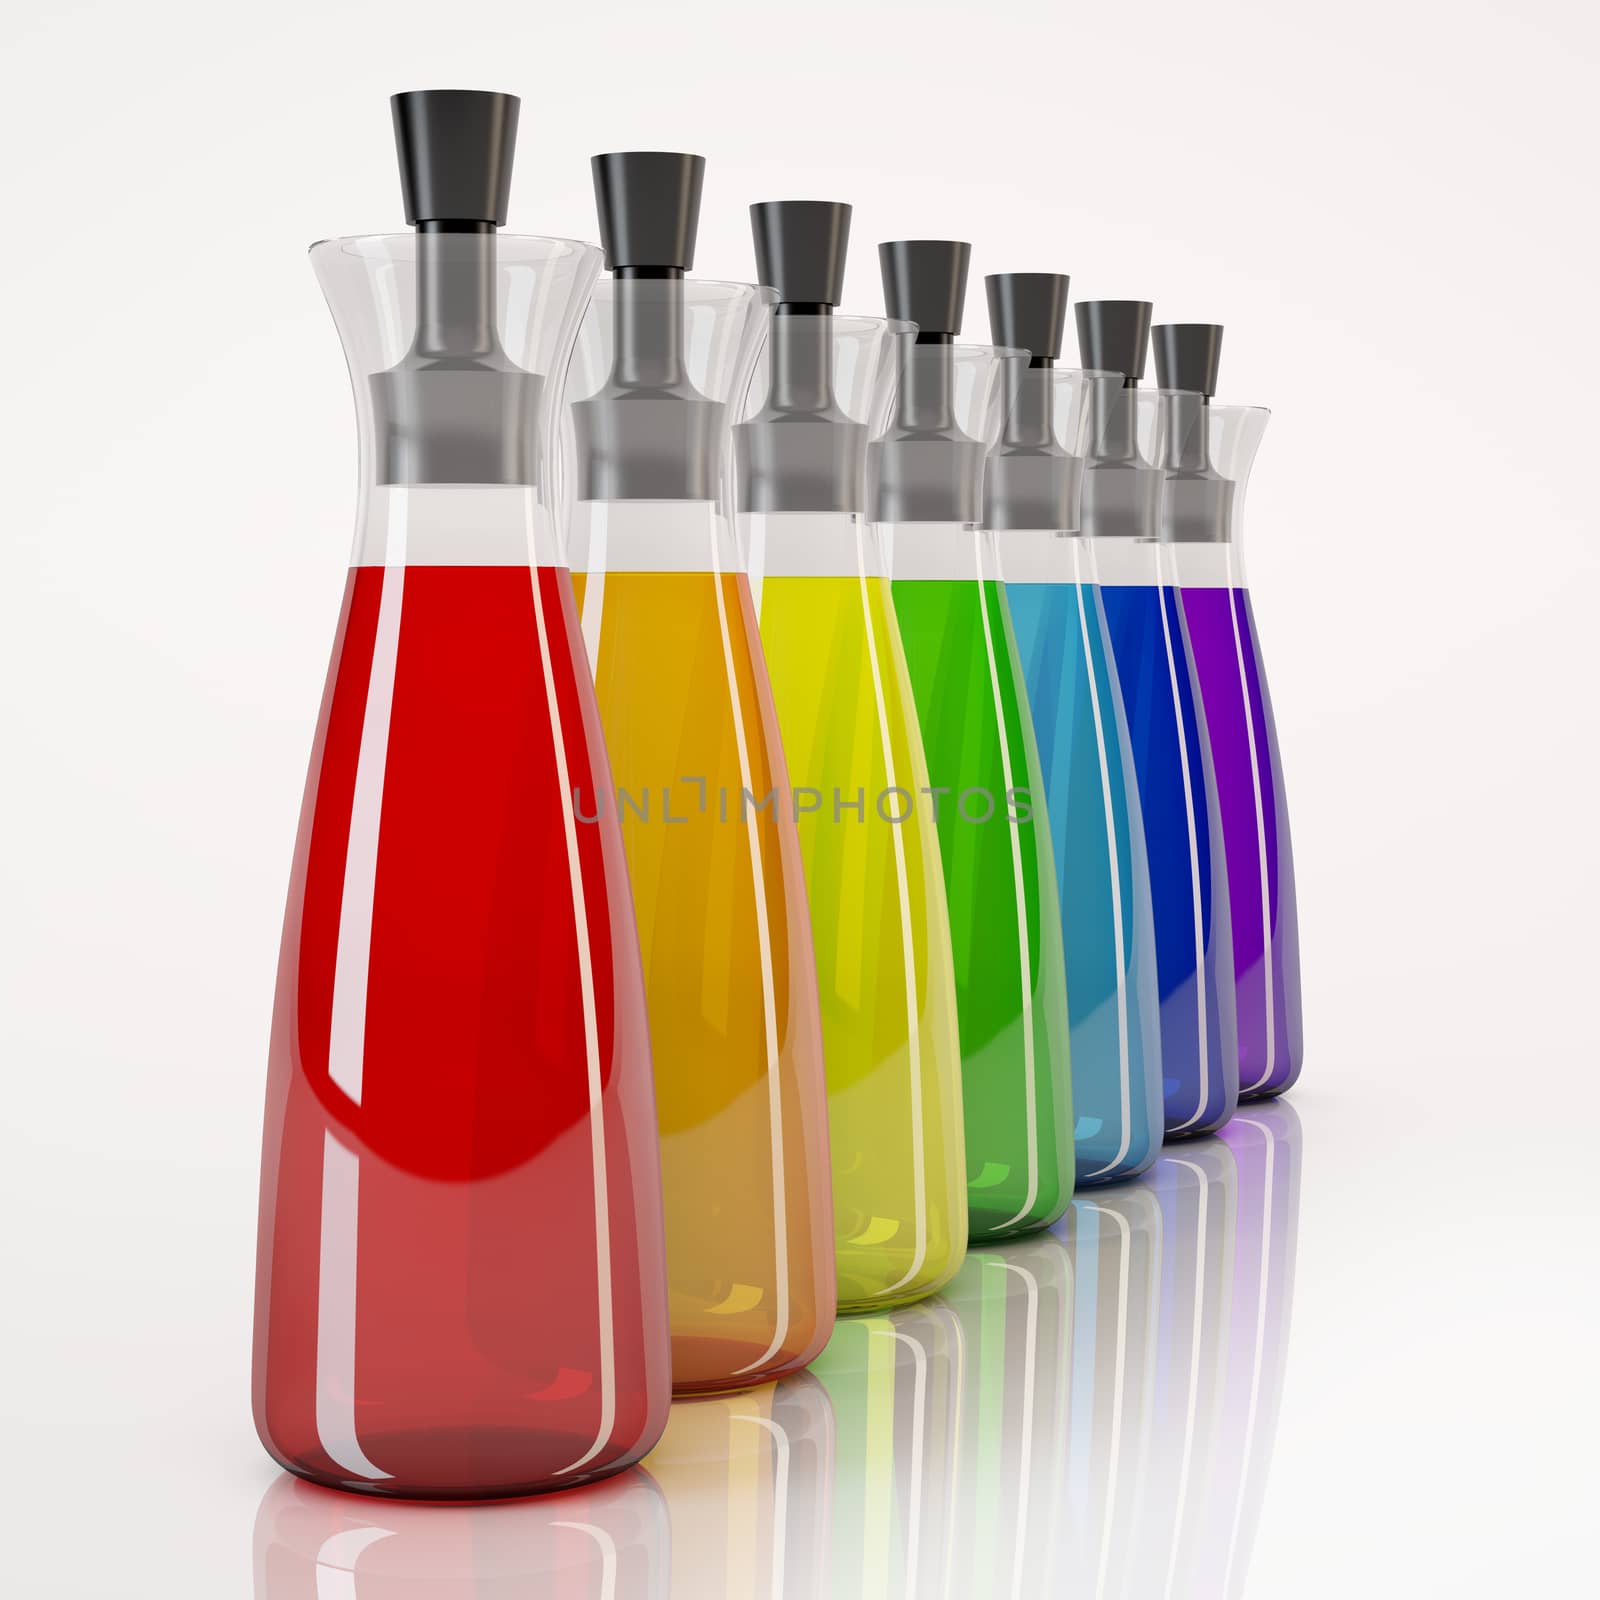 Rainbow bottles range with work path included